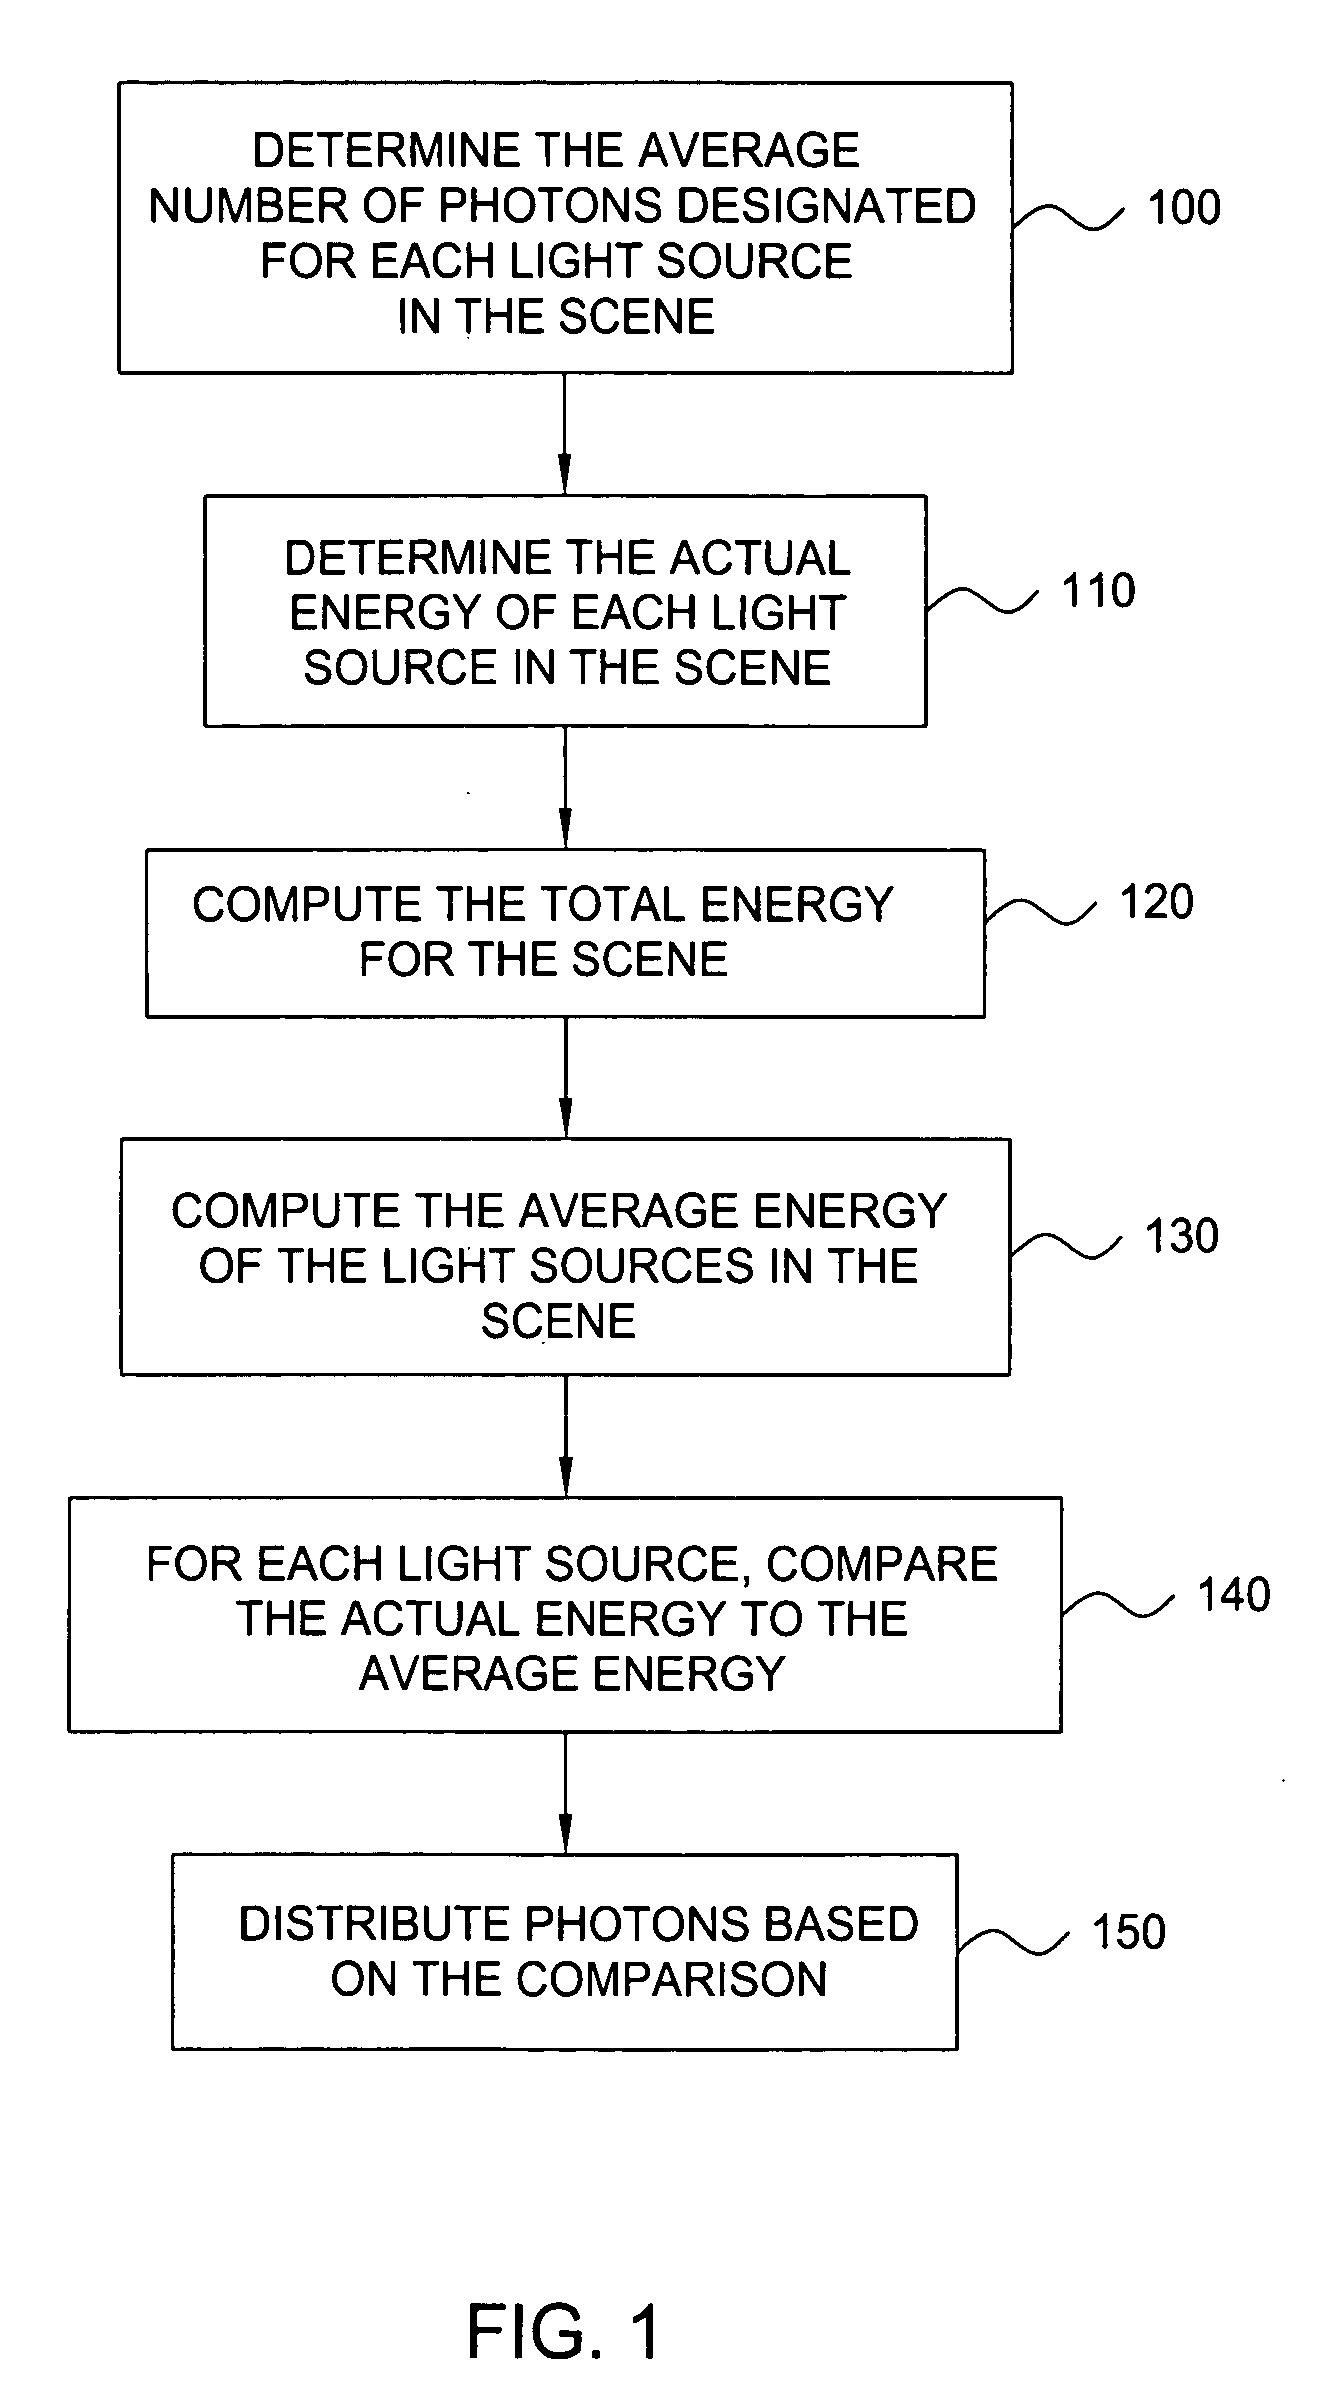 System and method for distributing photons when rendering an image using photon mapping